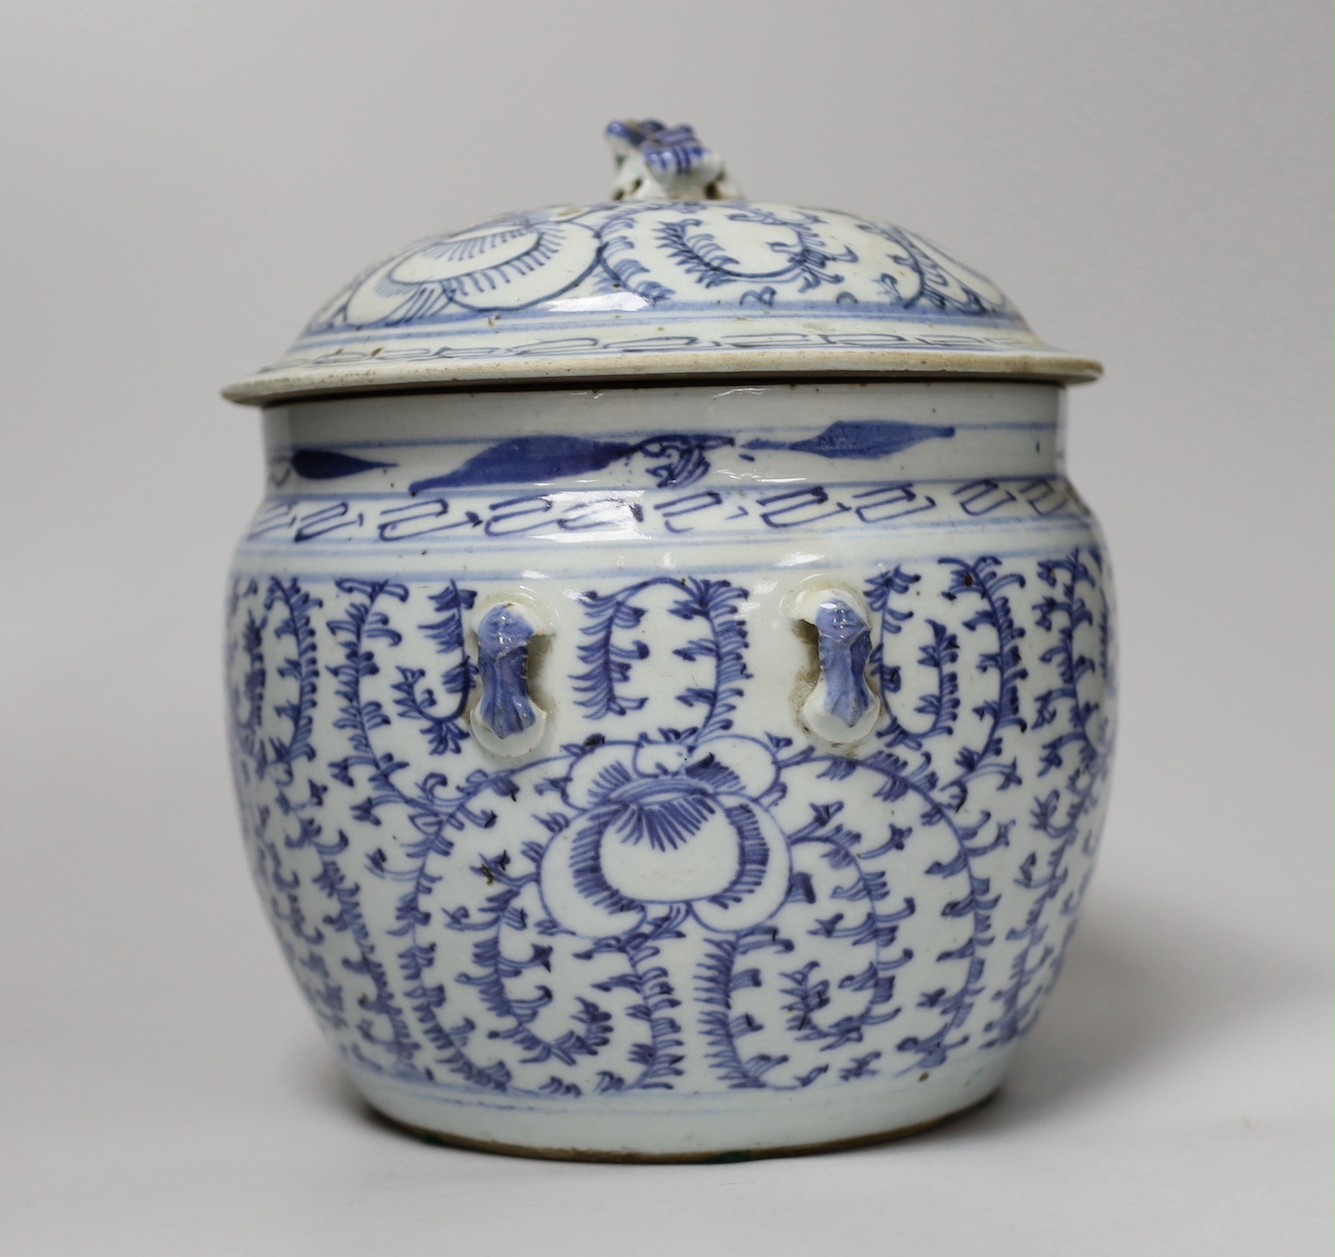 A 19th century Chinese blue and white jar and cover., kamcheng, 22cm high